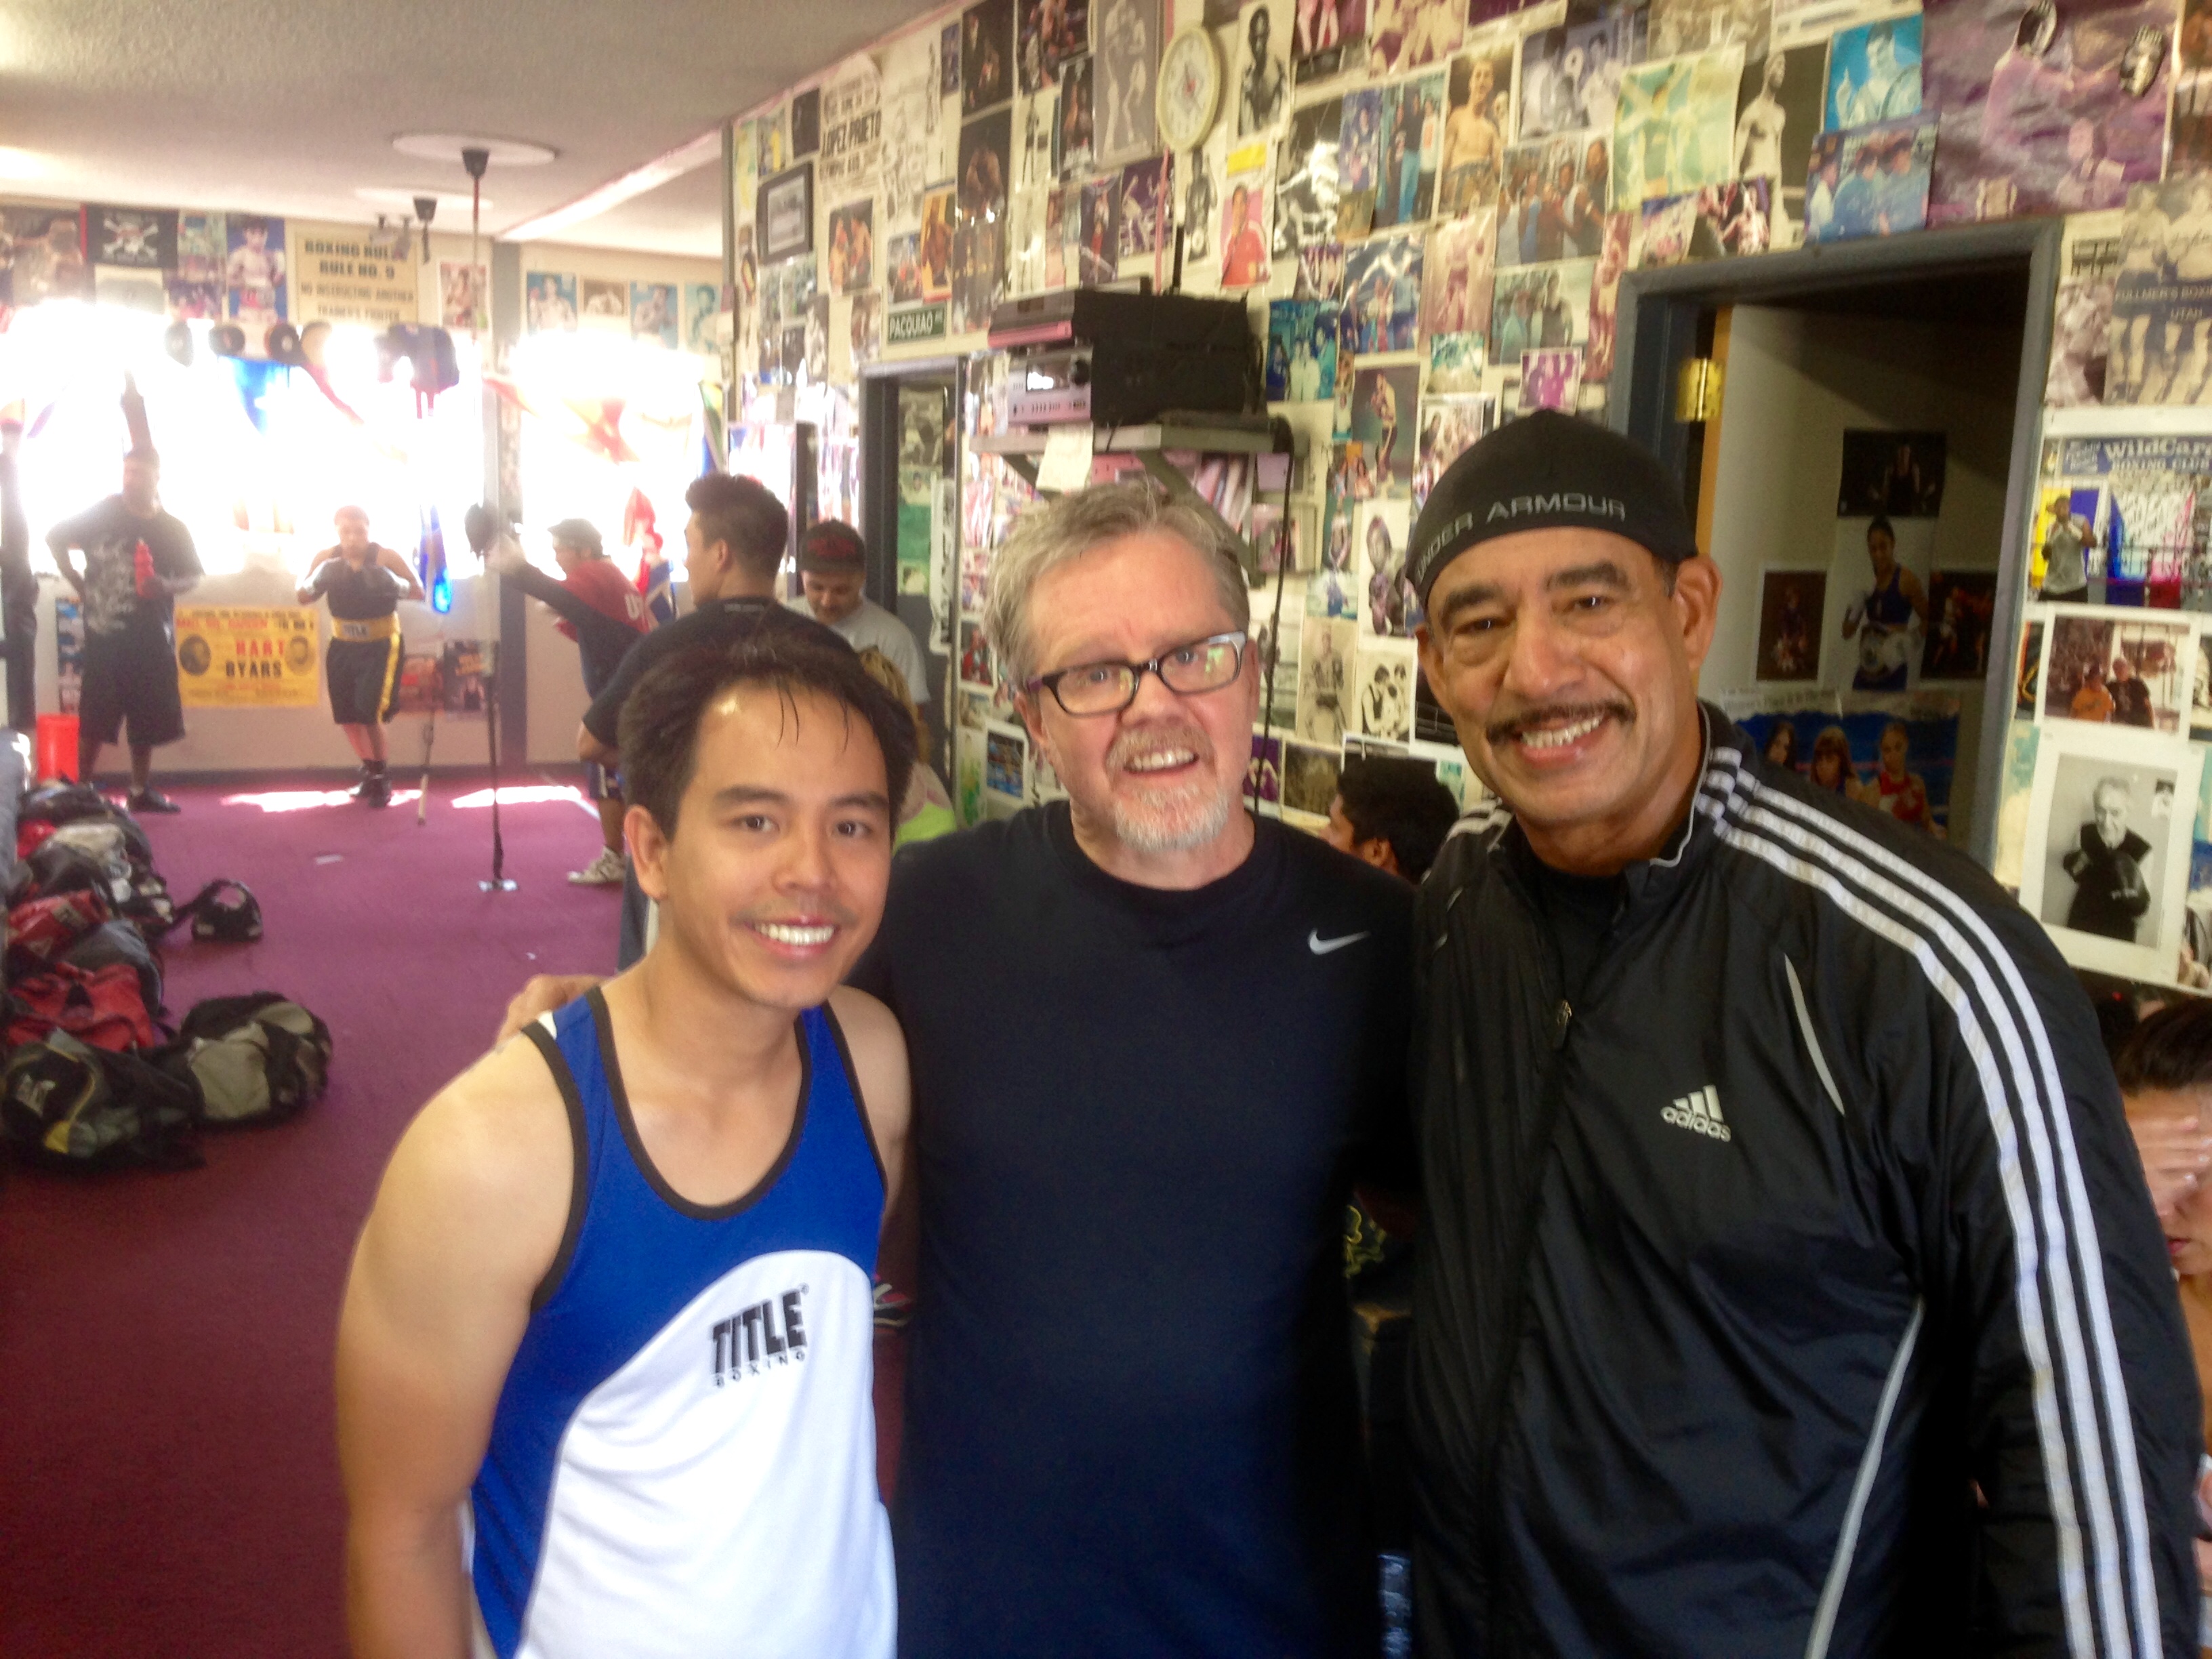 Freddie Roach at Wild Boxing Gym with Rey Rodis